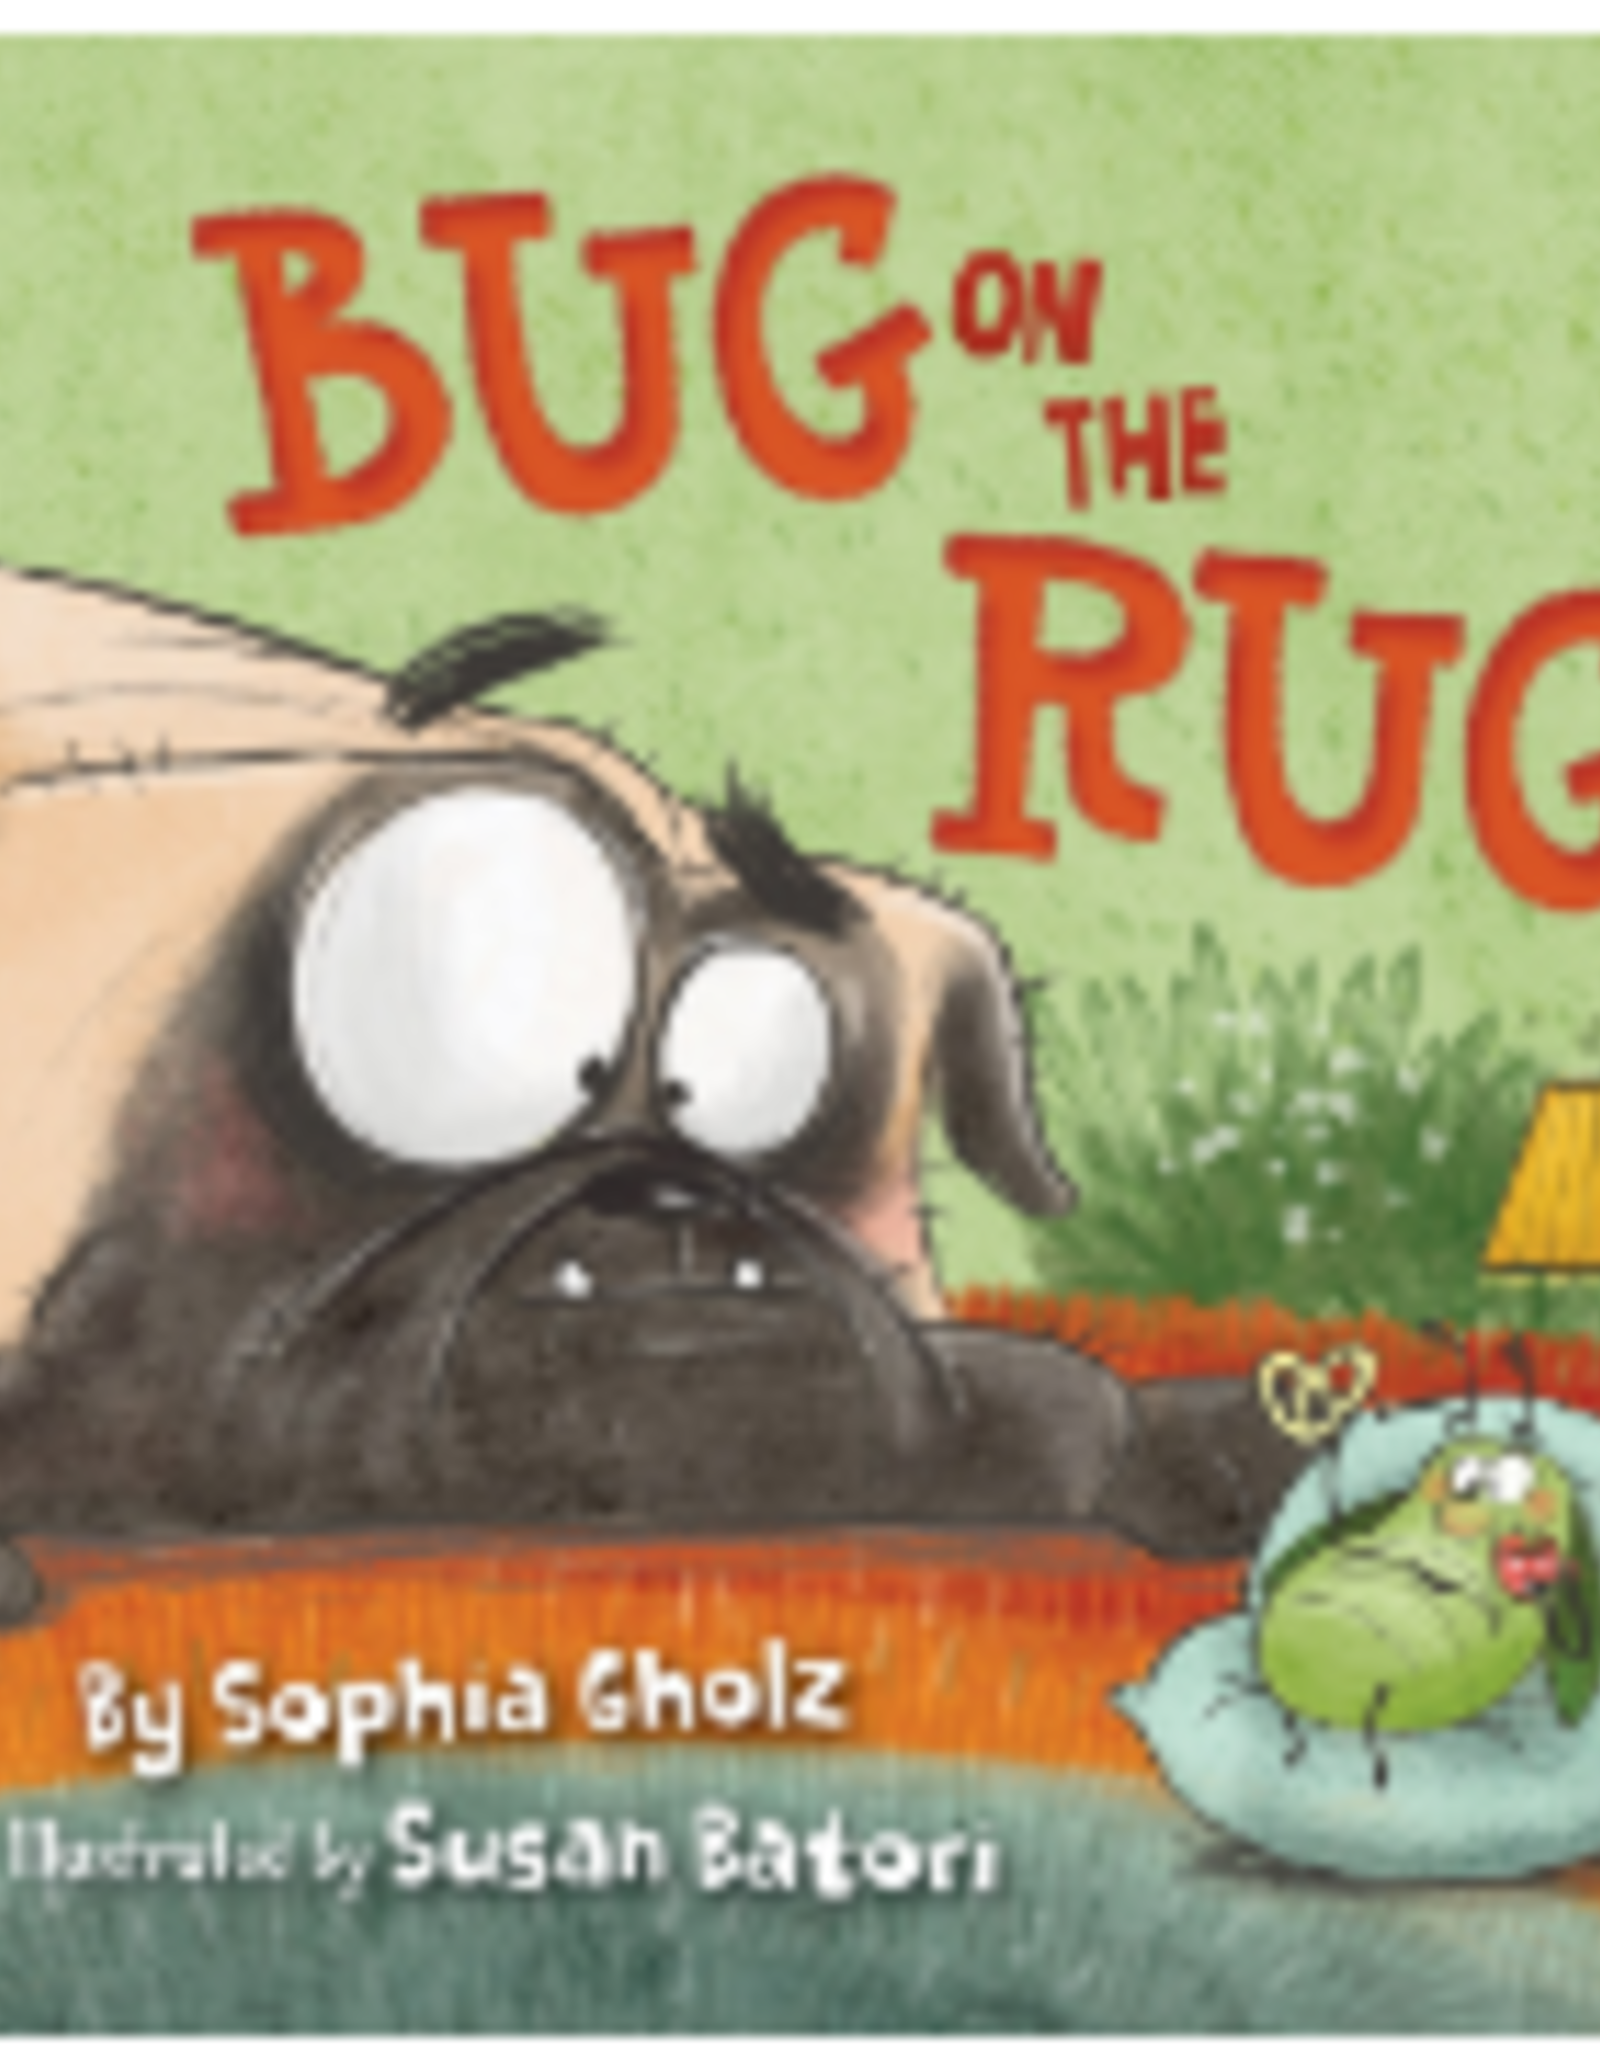 BOOK PUBLISHERS BUG ON THE RUG